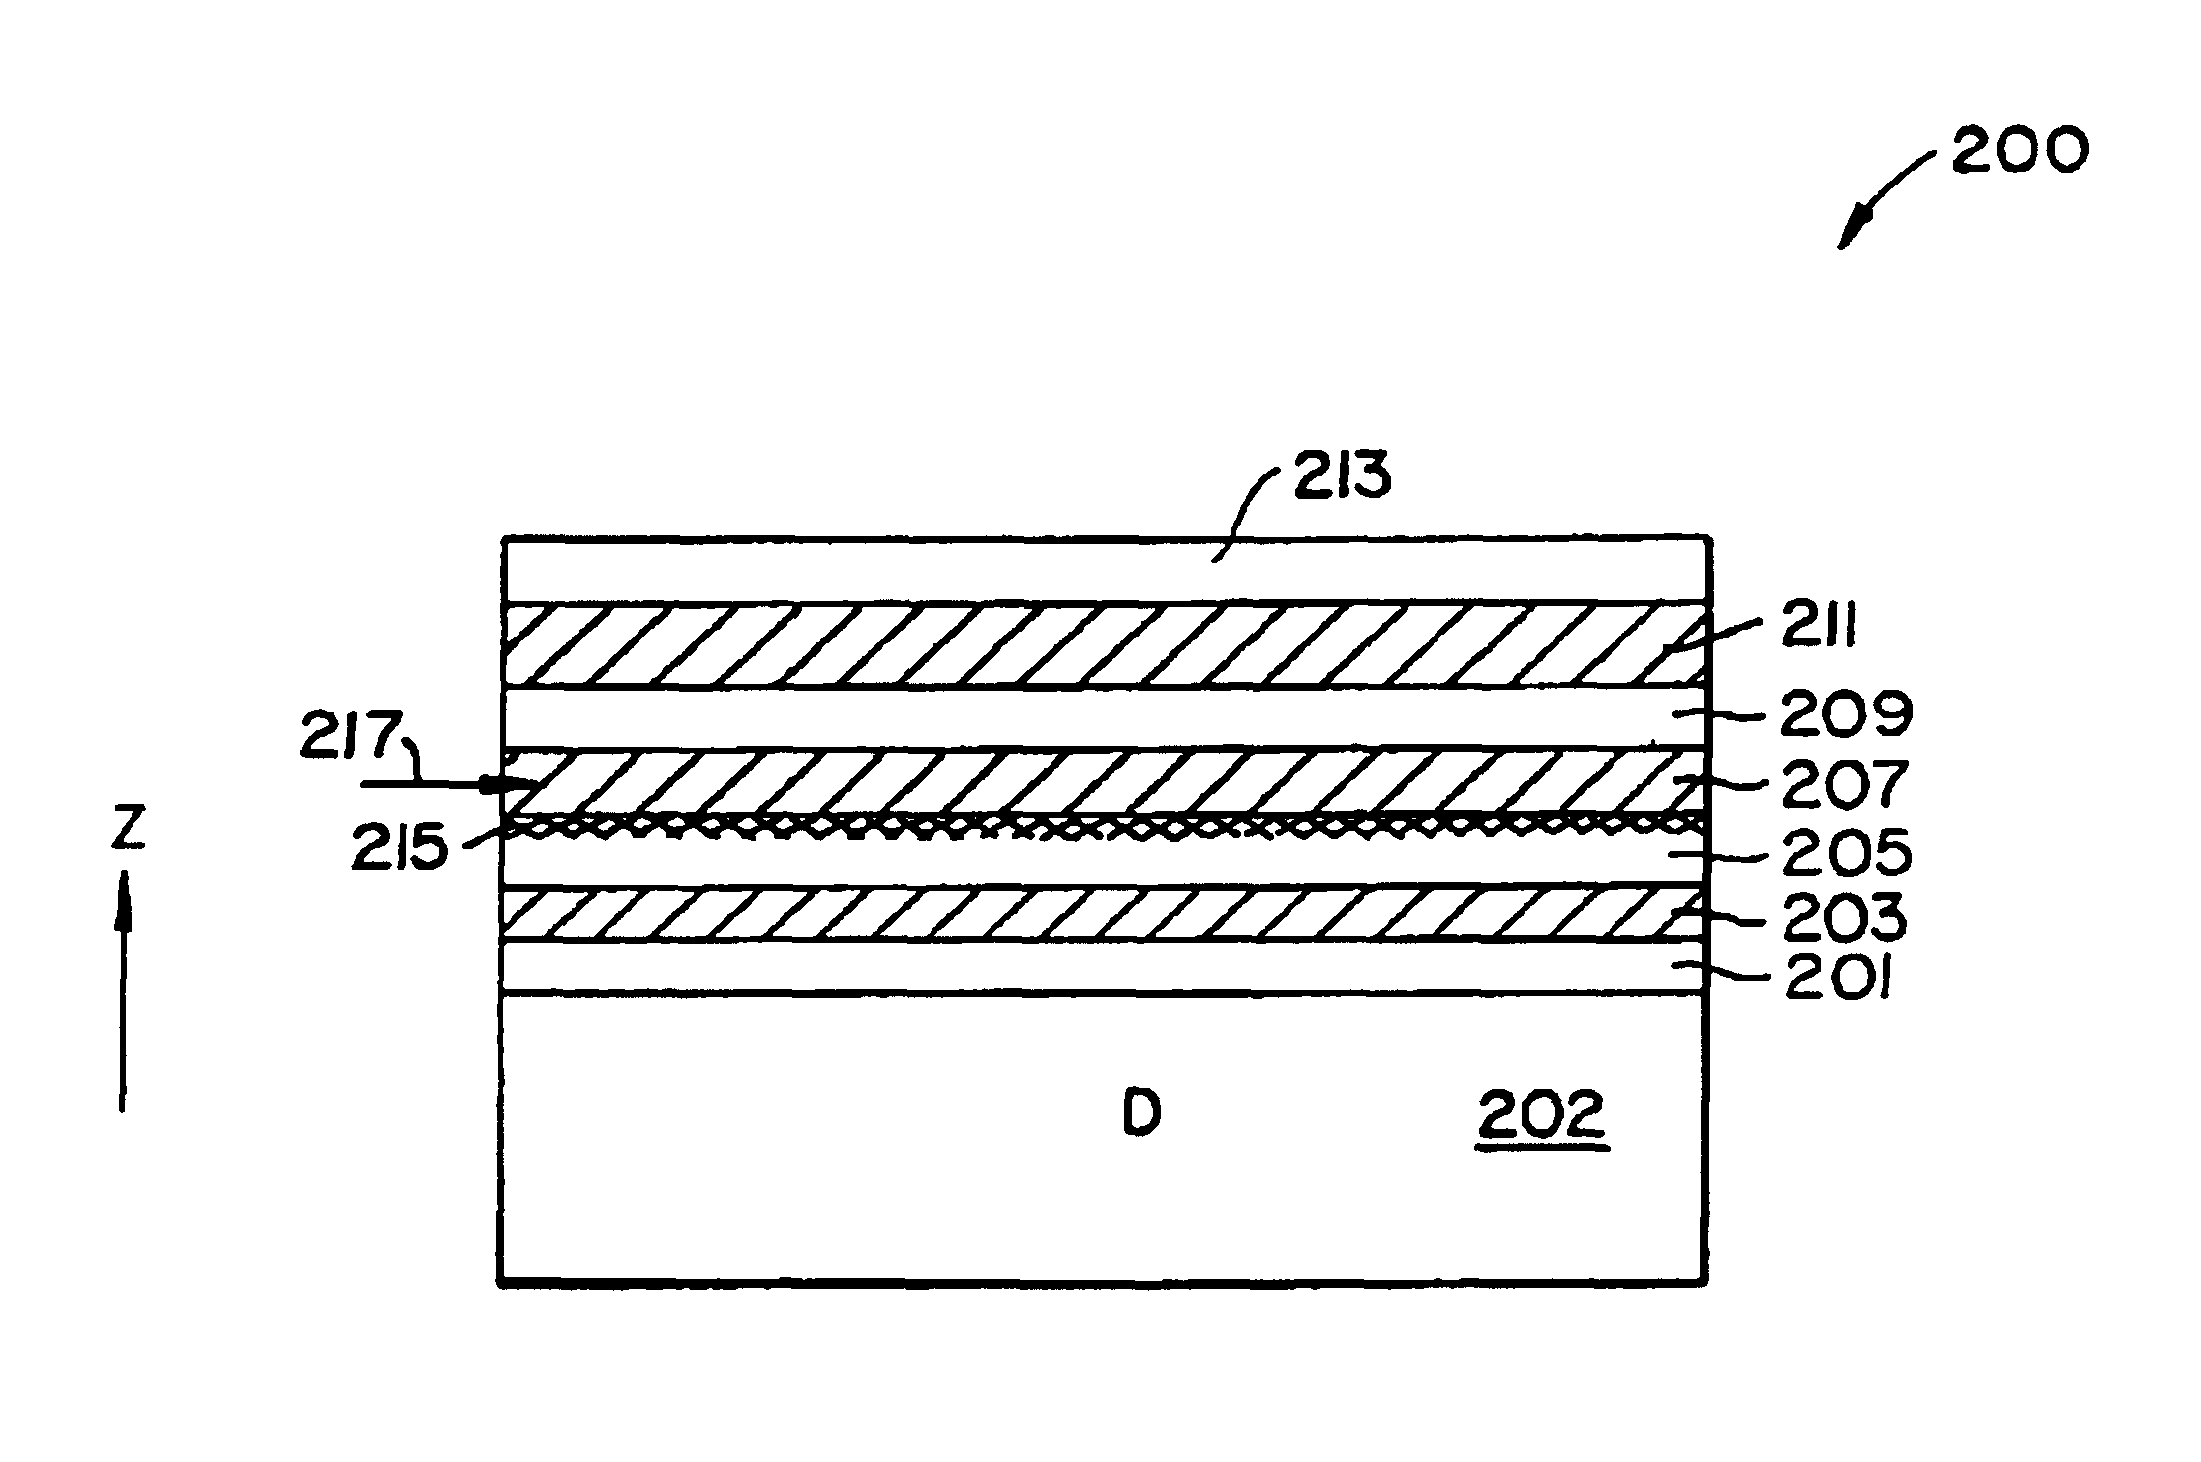 Cleaving process to fabricate multilayered substrates using low implantation doses